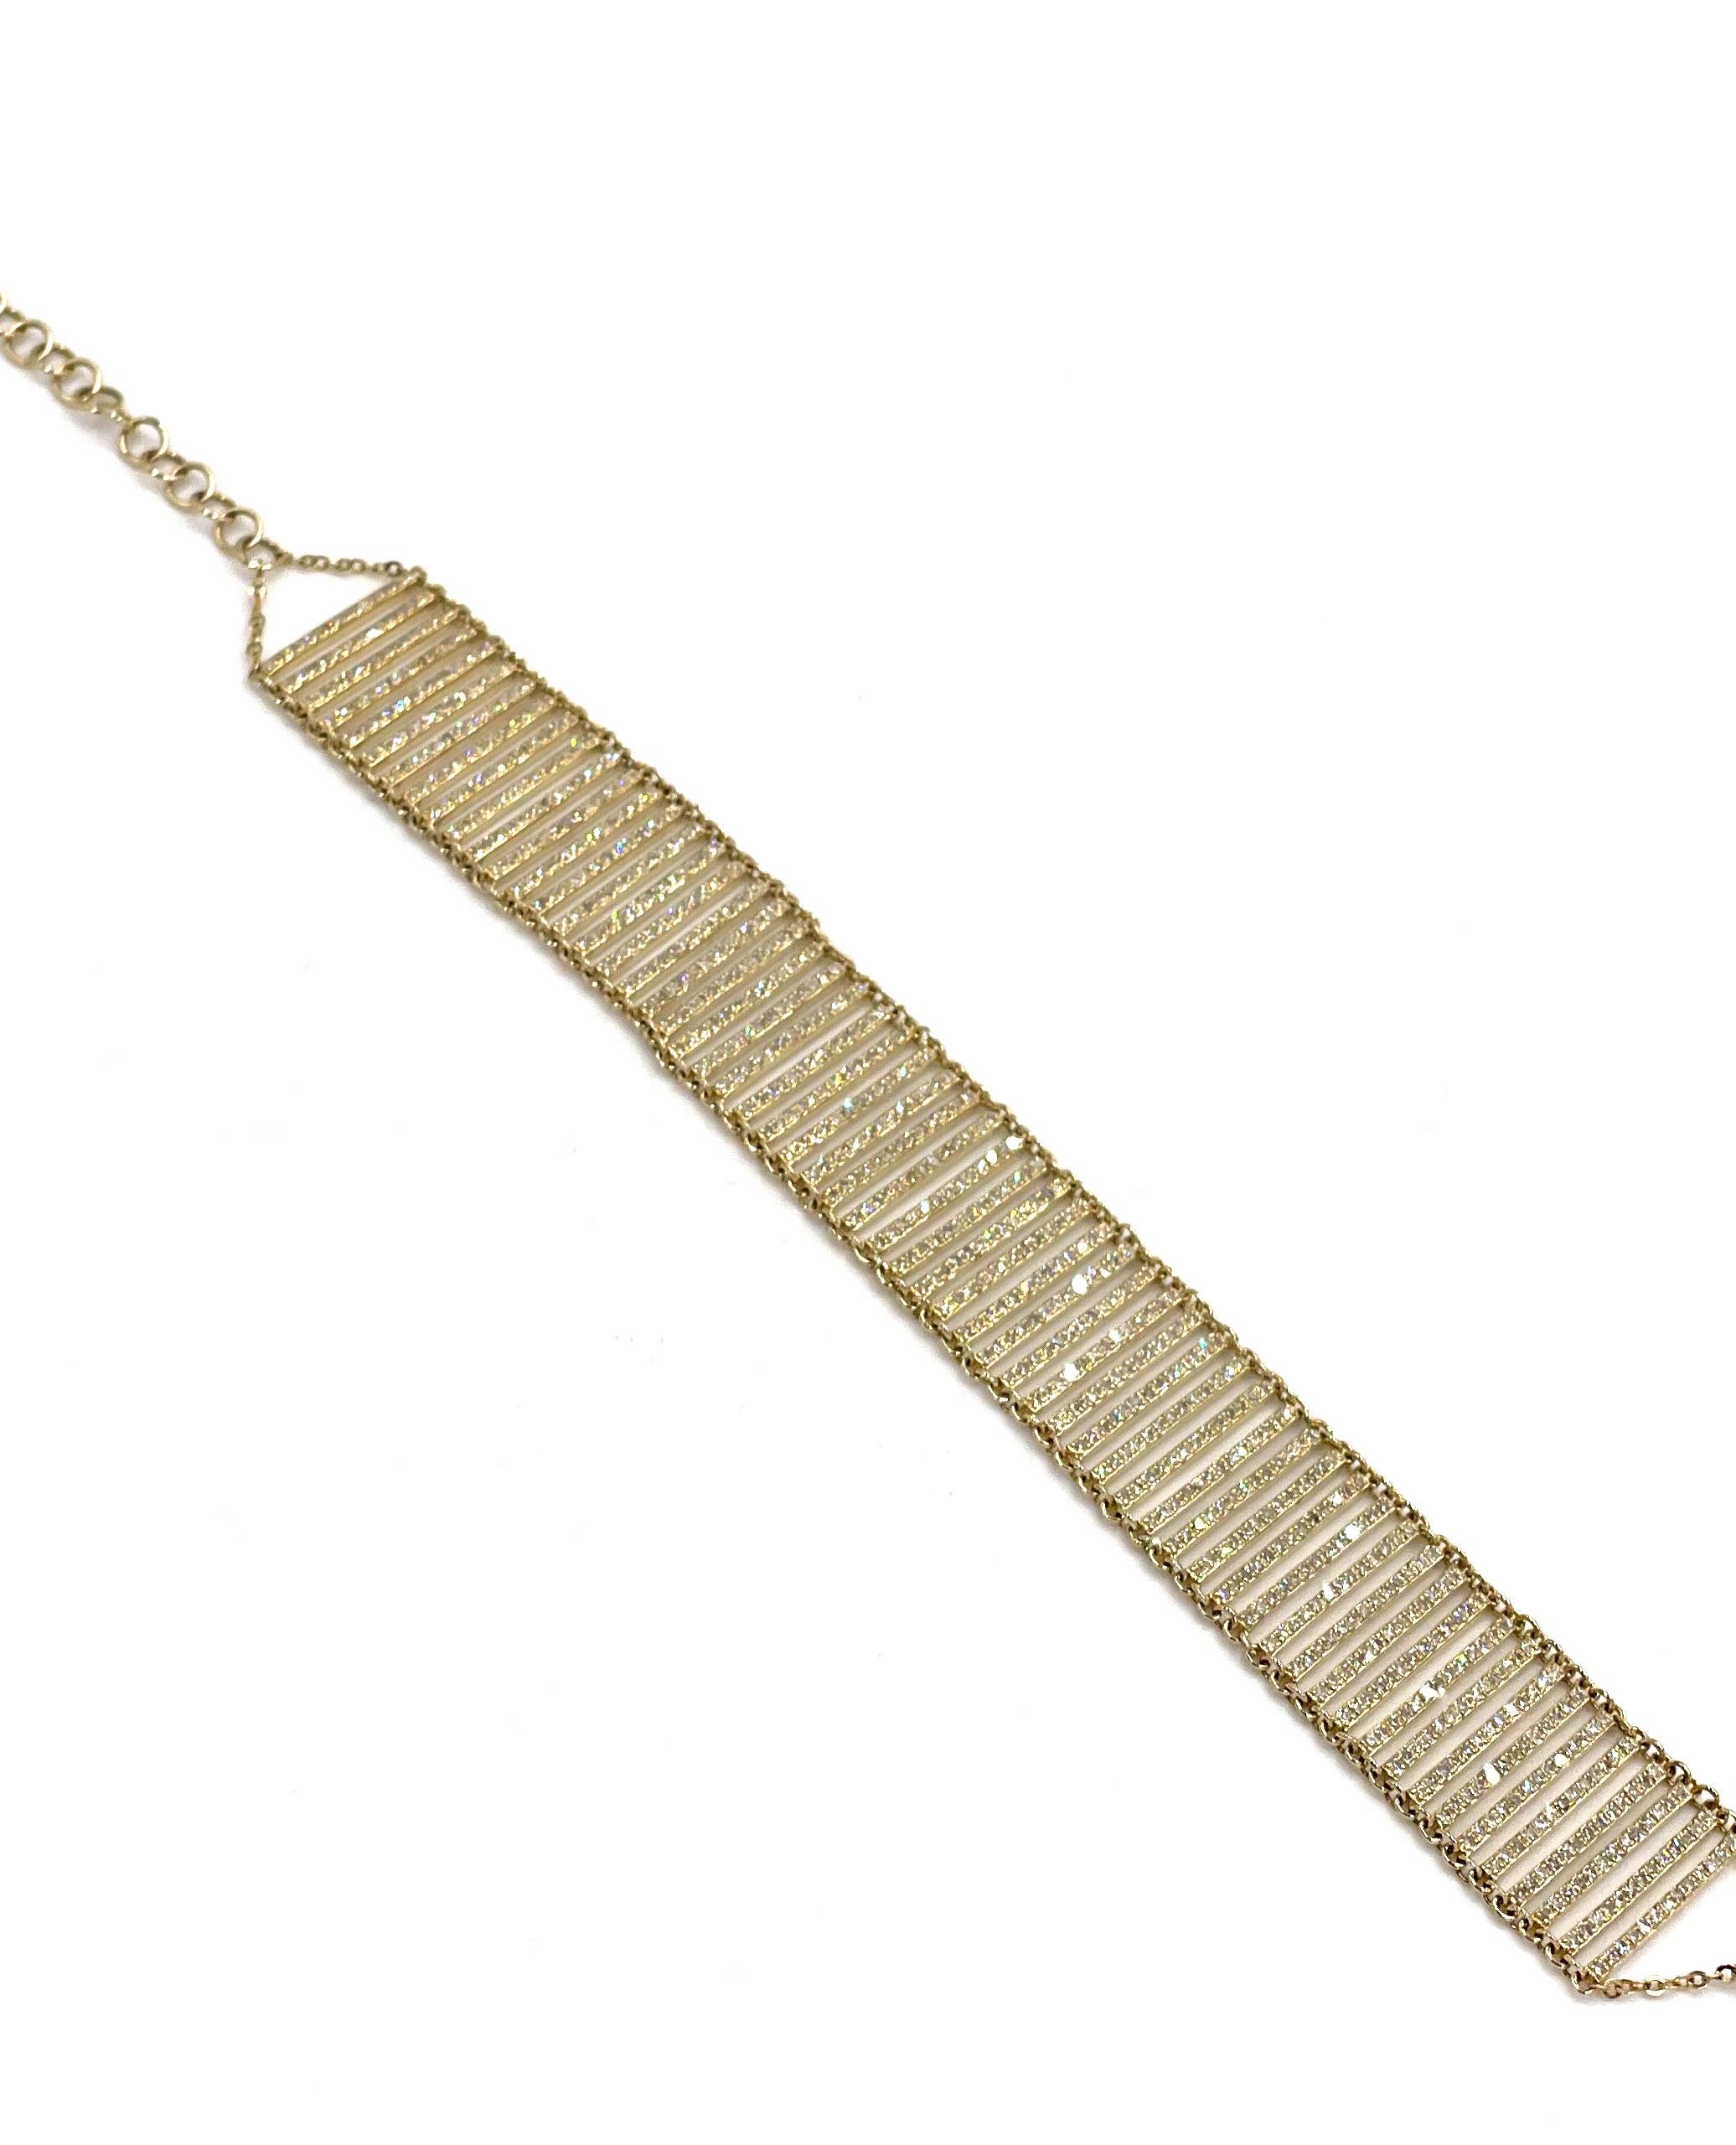 14K yellow gold flexible mesh bracelet with 780 round diamonds 2.21 carats total weight.

* Adjustable length. Can be worn 5.75-7.5 inches long
* Diamonds are H-J color, SI clarity.